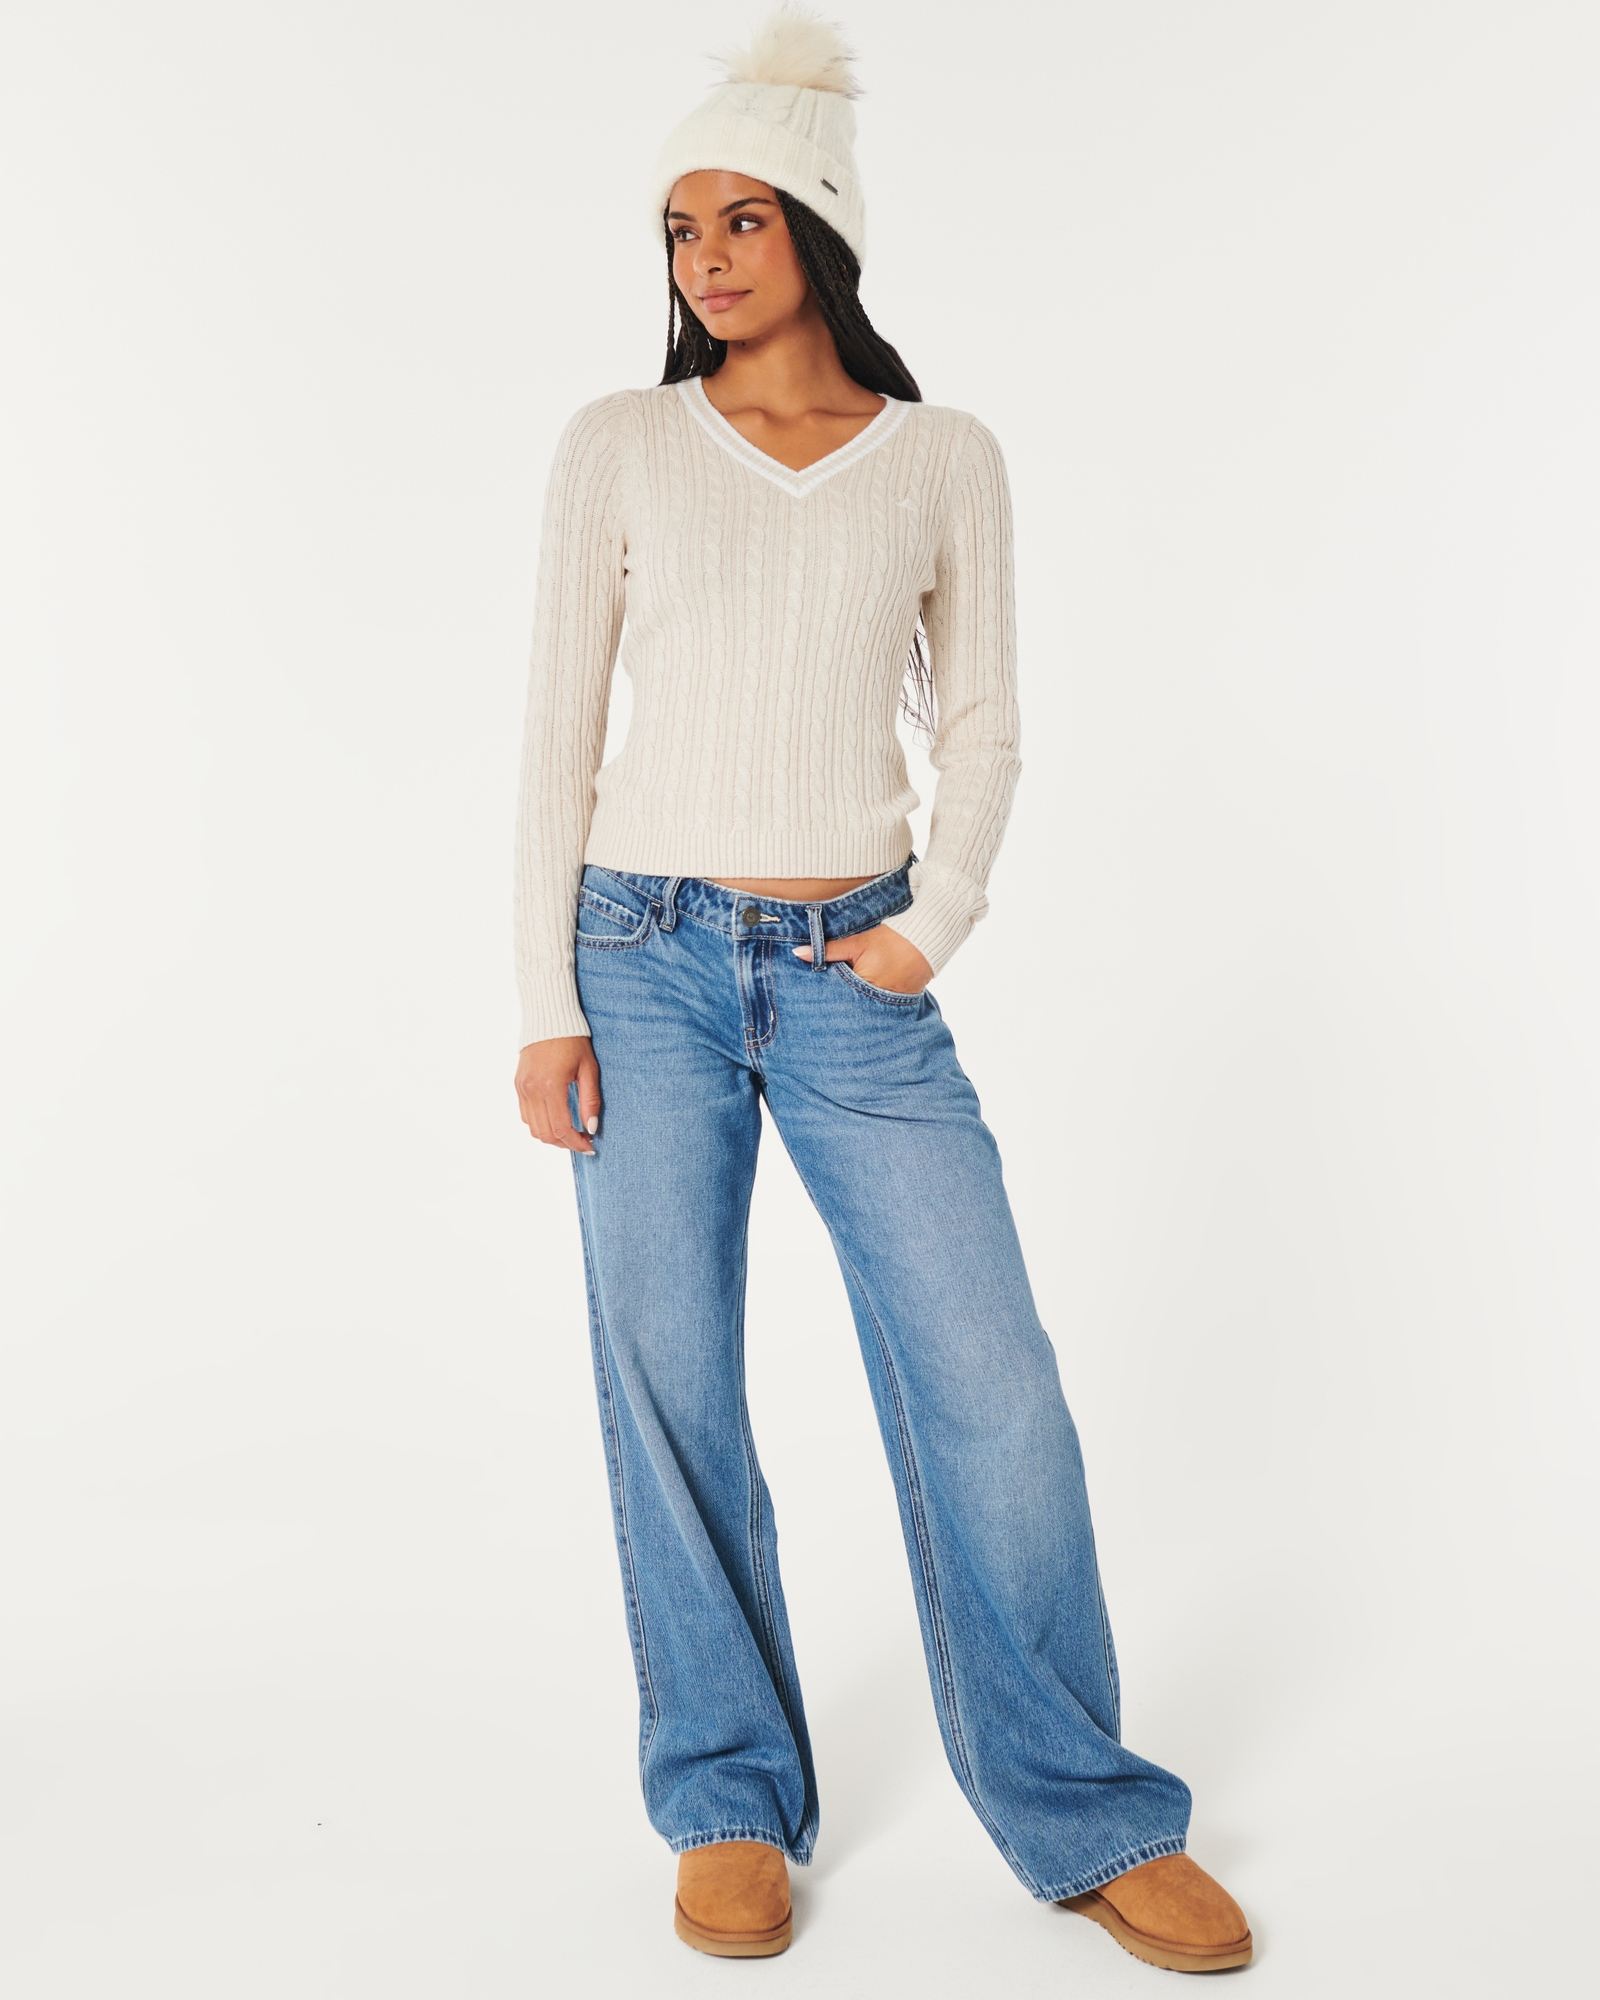 Hollister Co. Thermal V-neck Sweaters for Women